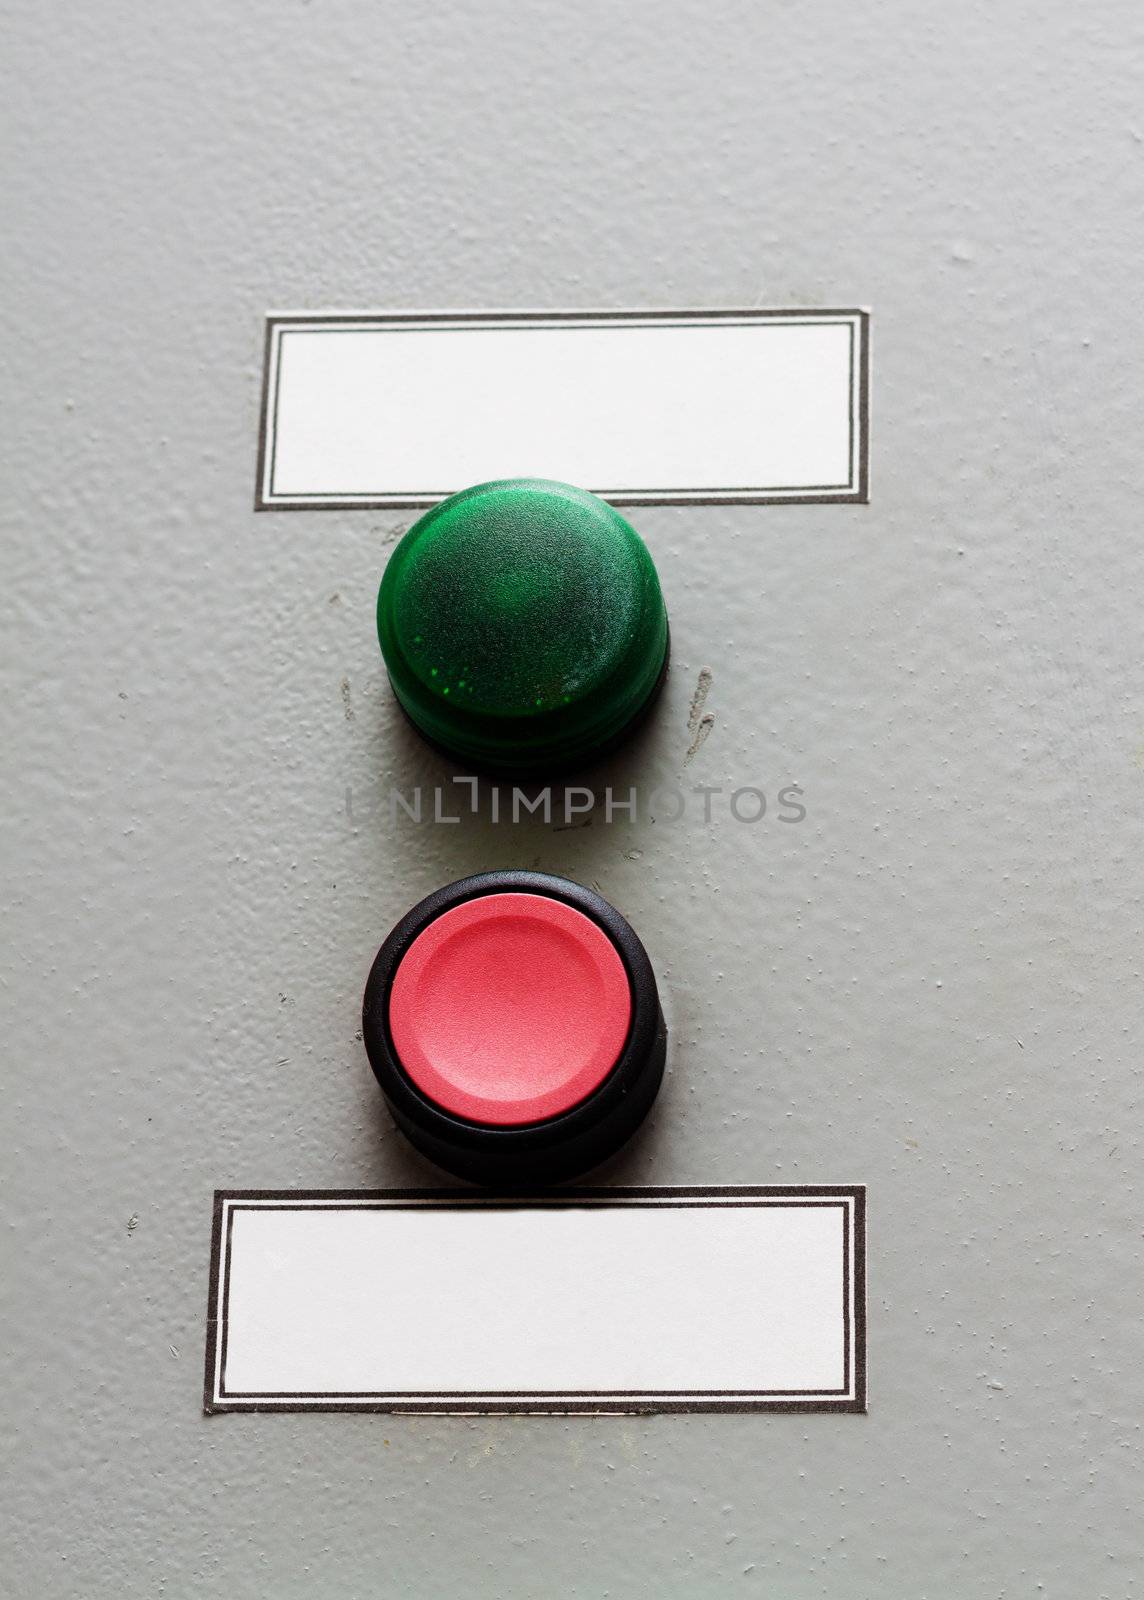 Green start and red stop buttons by Lamarinx